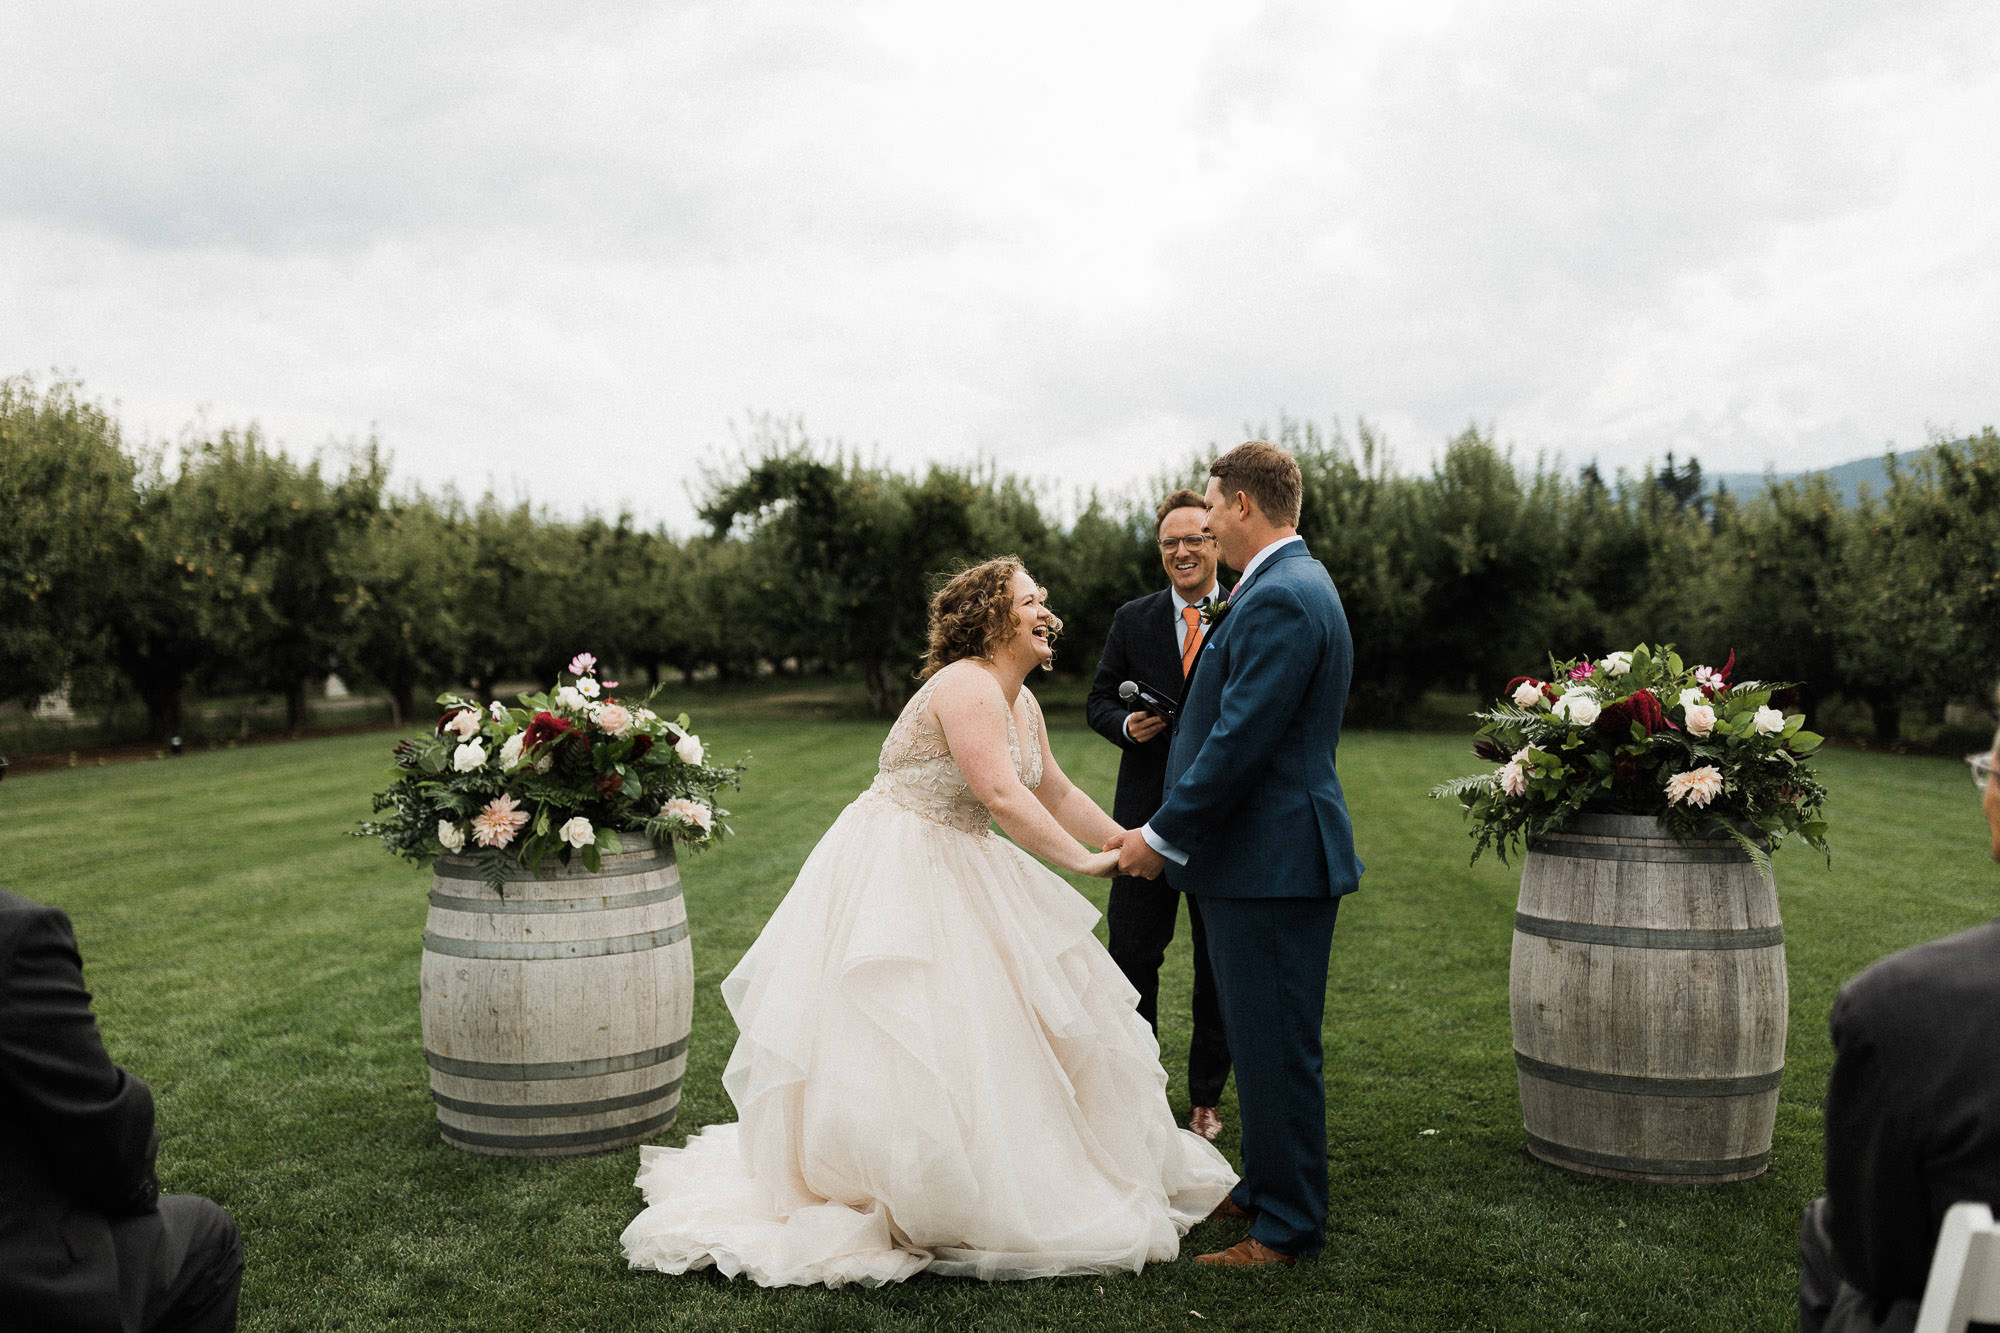 Bride and groom laugh during ceremony at Mt View Orchards in Hood River, Oregon